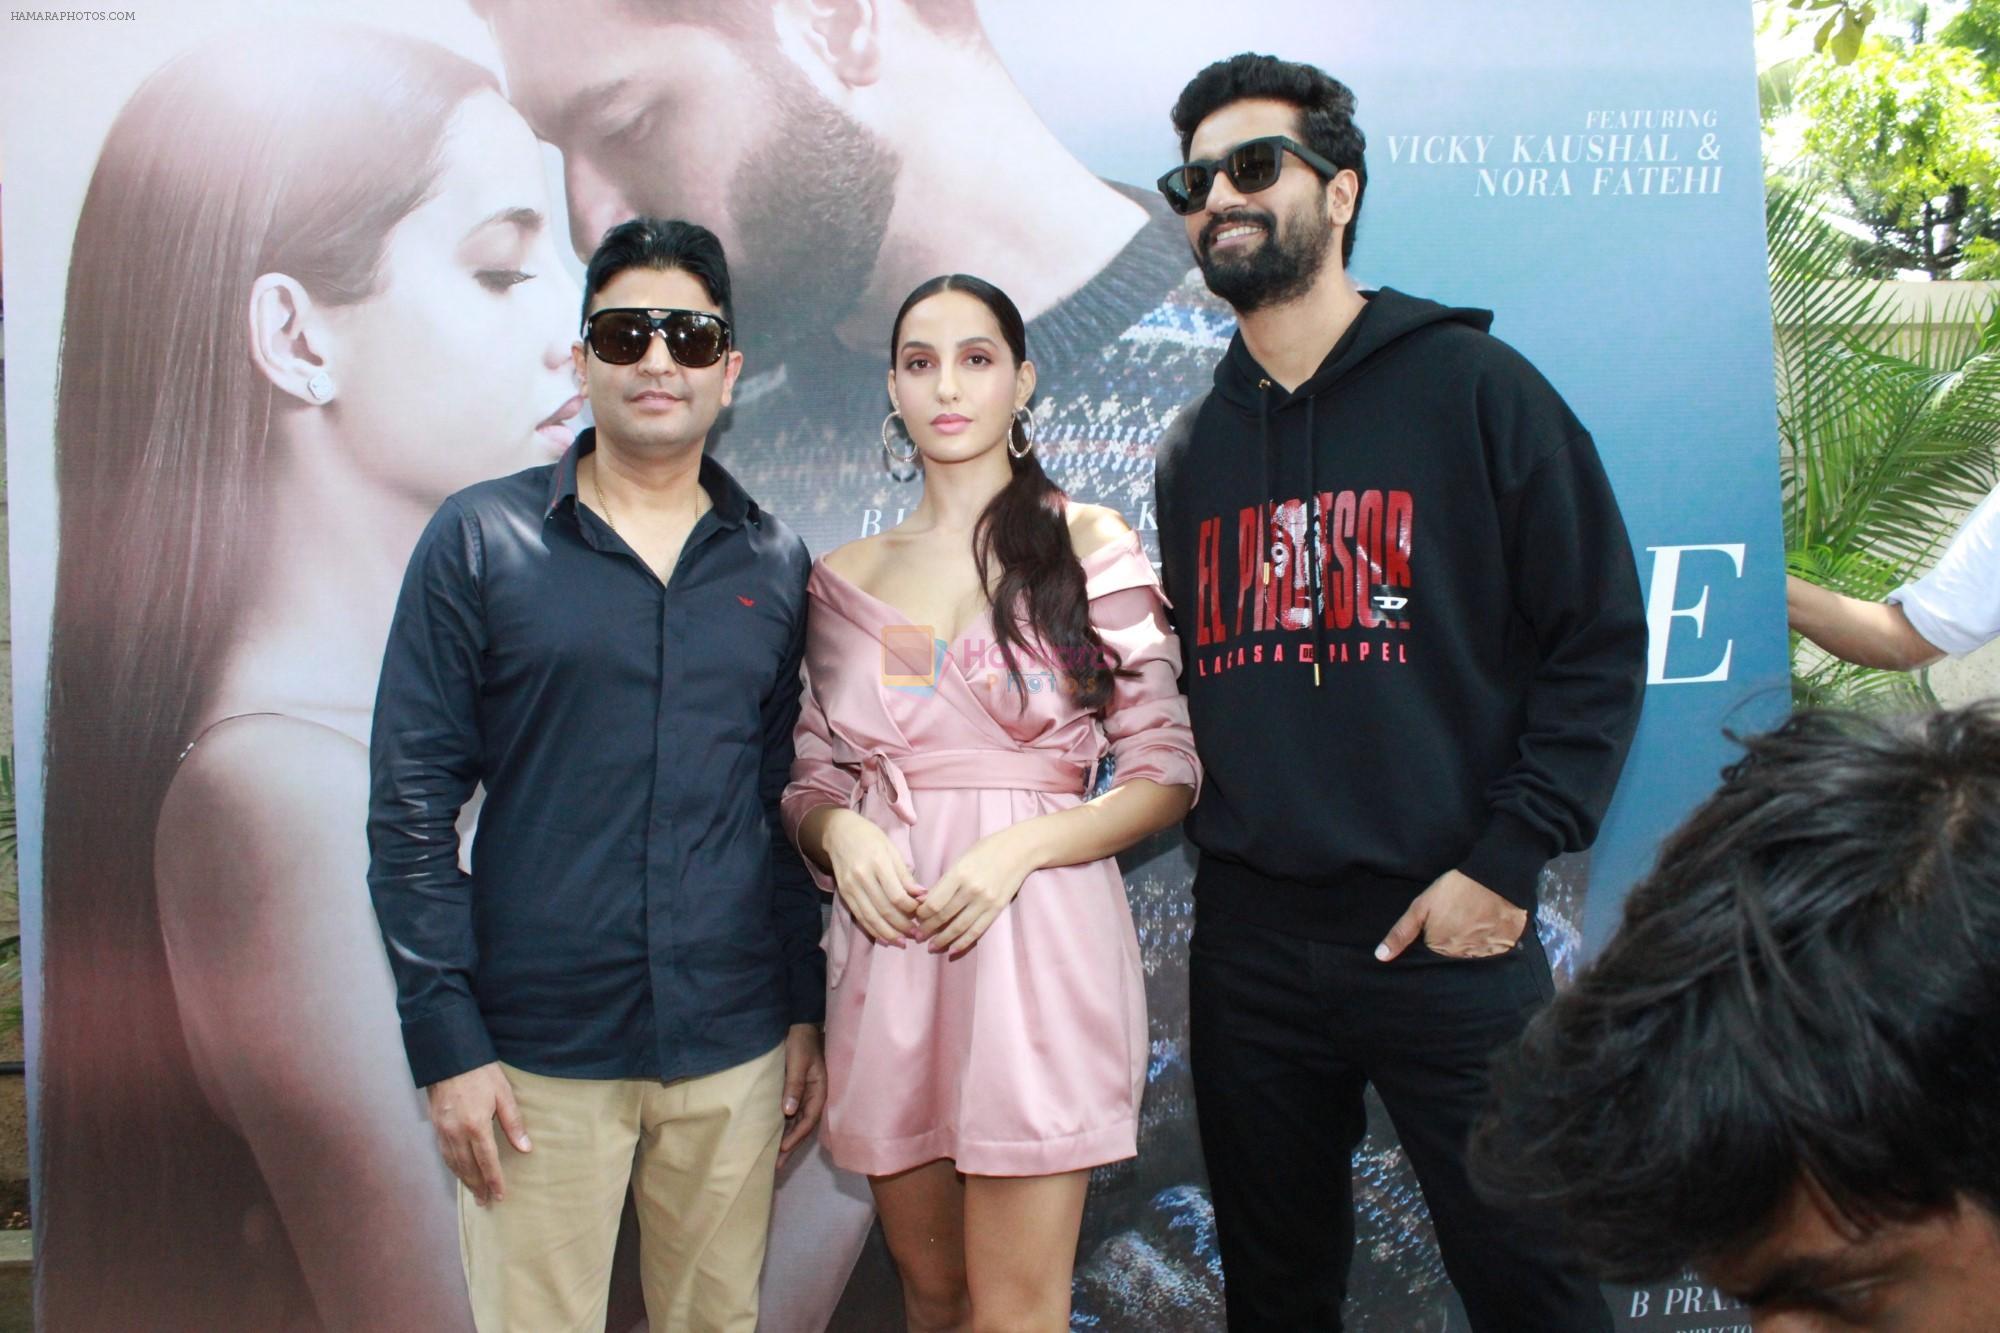 Vicky Kaushal, Nora Fatehi, Bhushan Kumar Celebrate The Success Of Single Song Pachtaoge on 27th Aug 2019